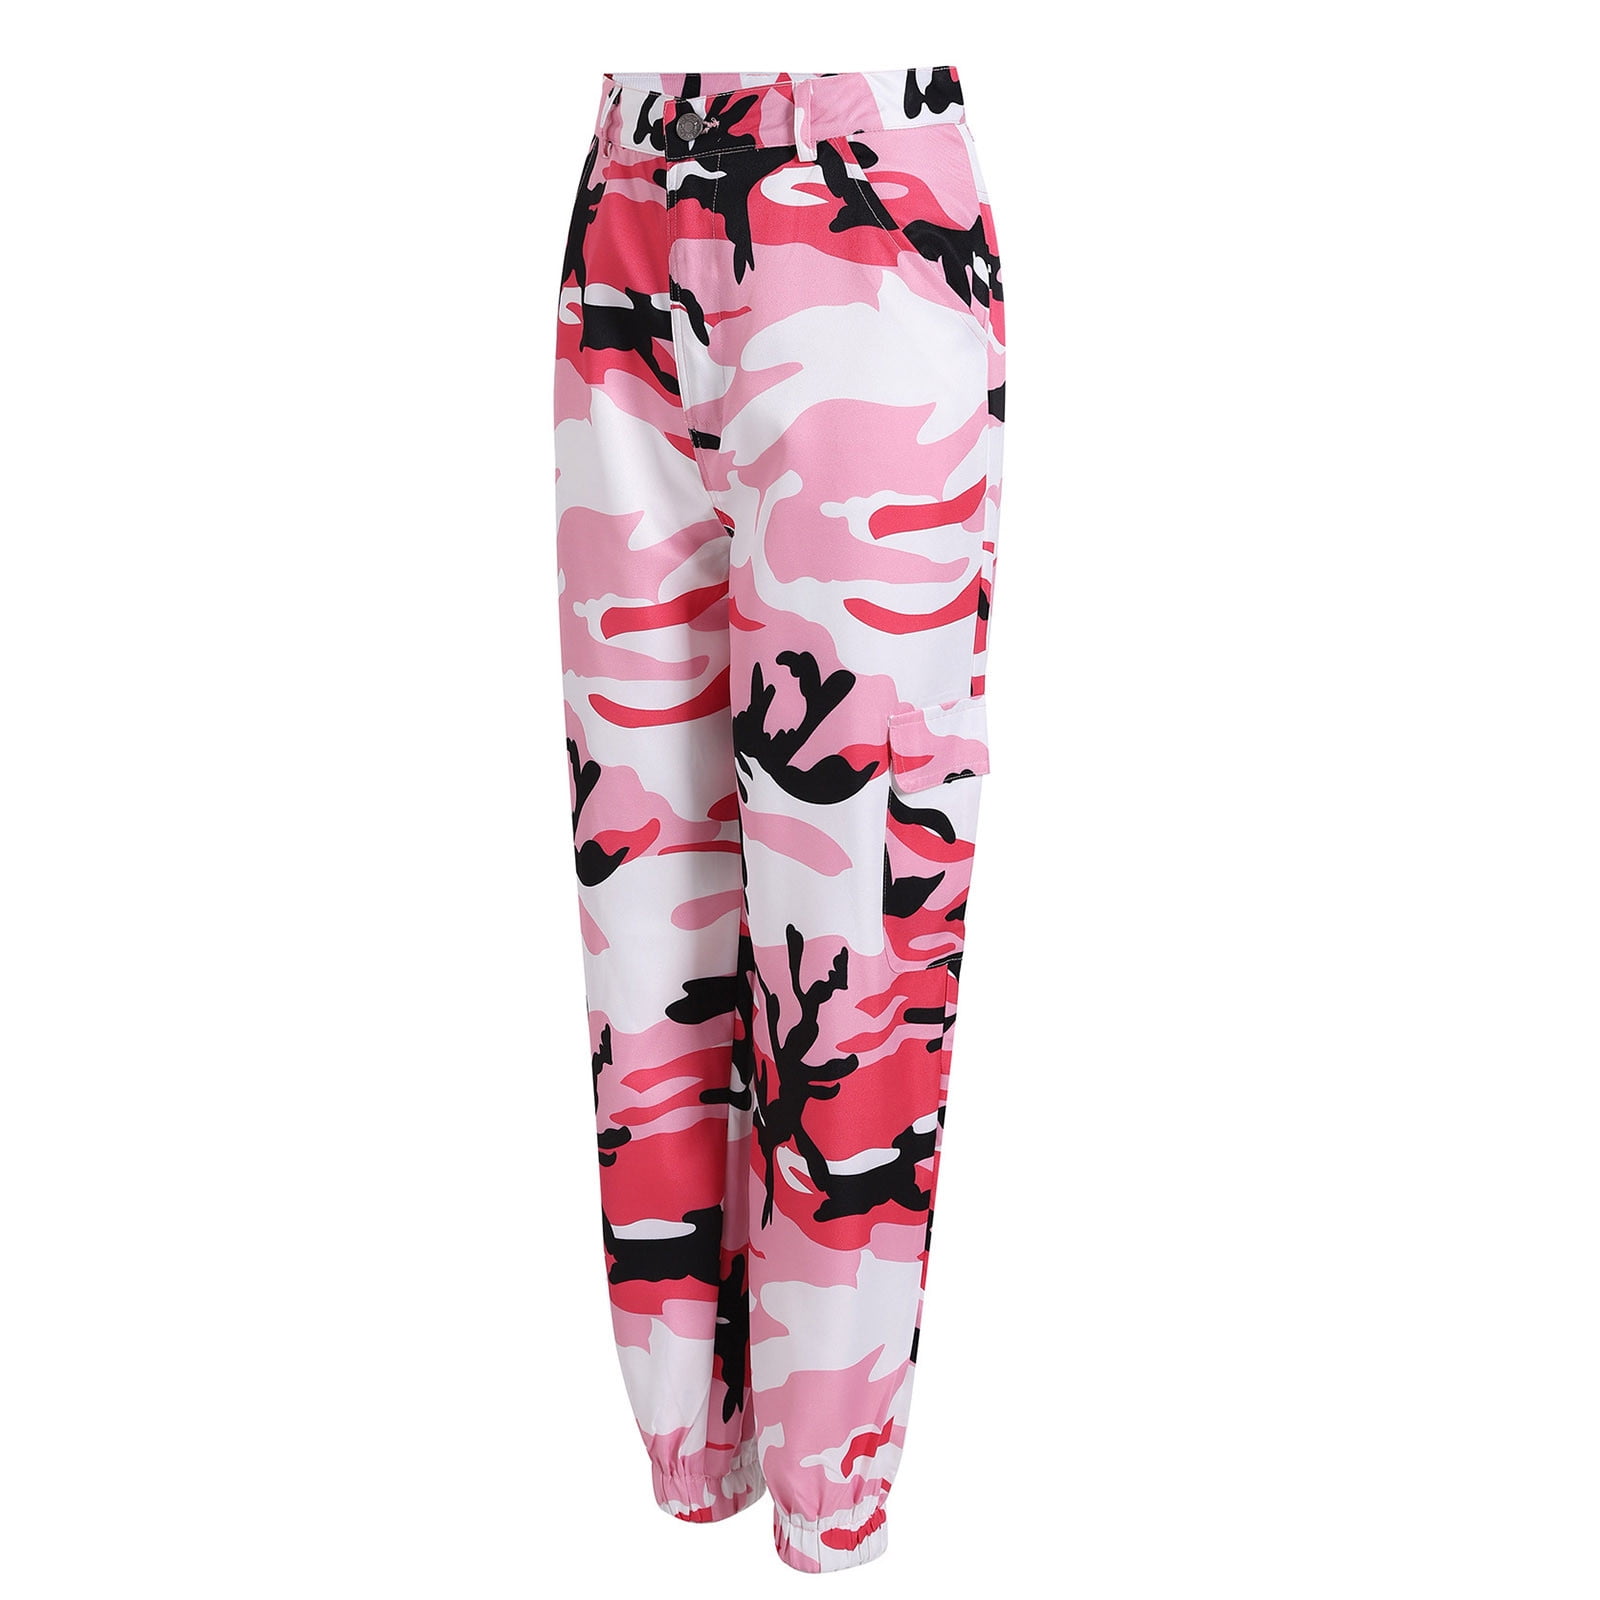 Zubaz Realtree Camo Printed Athletic Lounge Pants, Pink – Eclectic-Sports